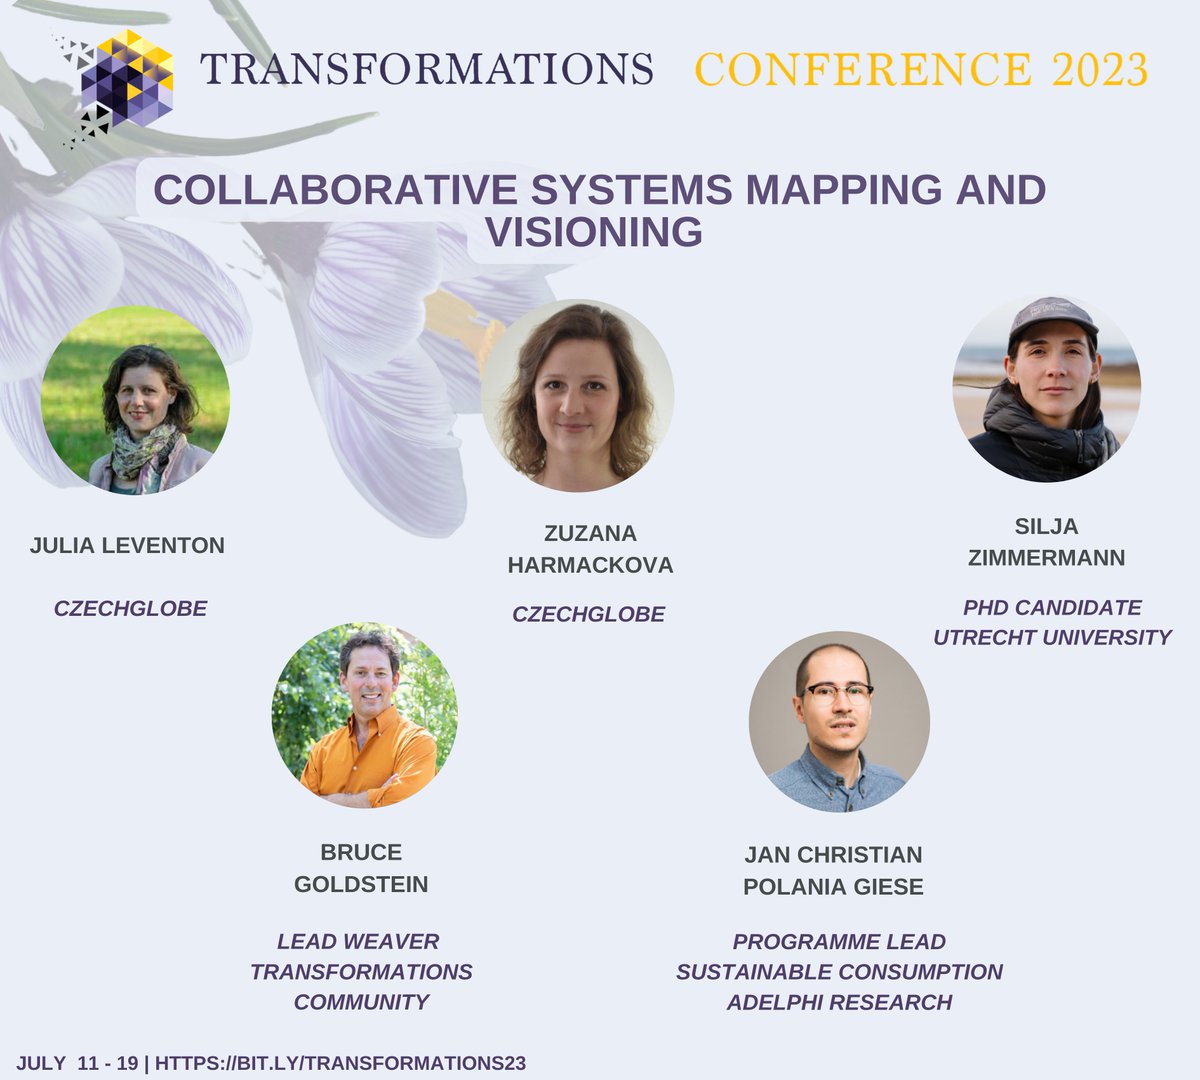 🌍 Welcome to the 6th conference of the global network of #Transformations thought leaders & practitioners! 🎉 Today is DAY 1 of our conference in Prague. 📌Dive into a dynamic lineup of events. Check out today's agenda and plan your schedule: bit.ly/PragueTC23 #TC23